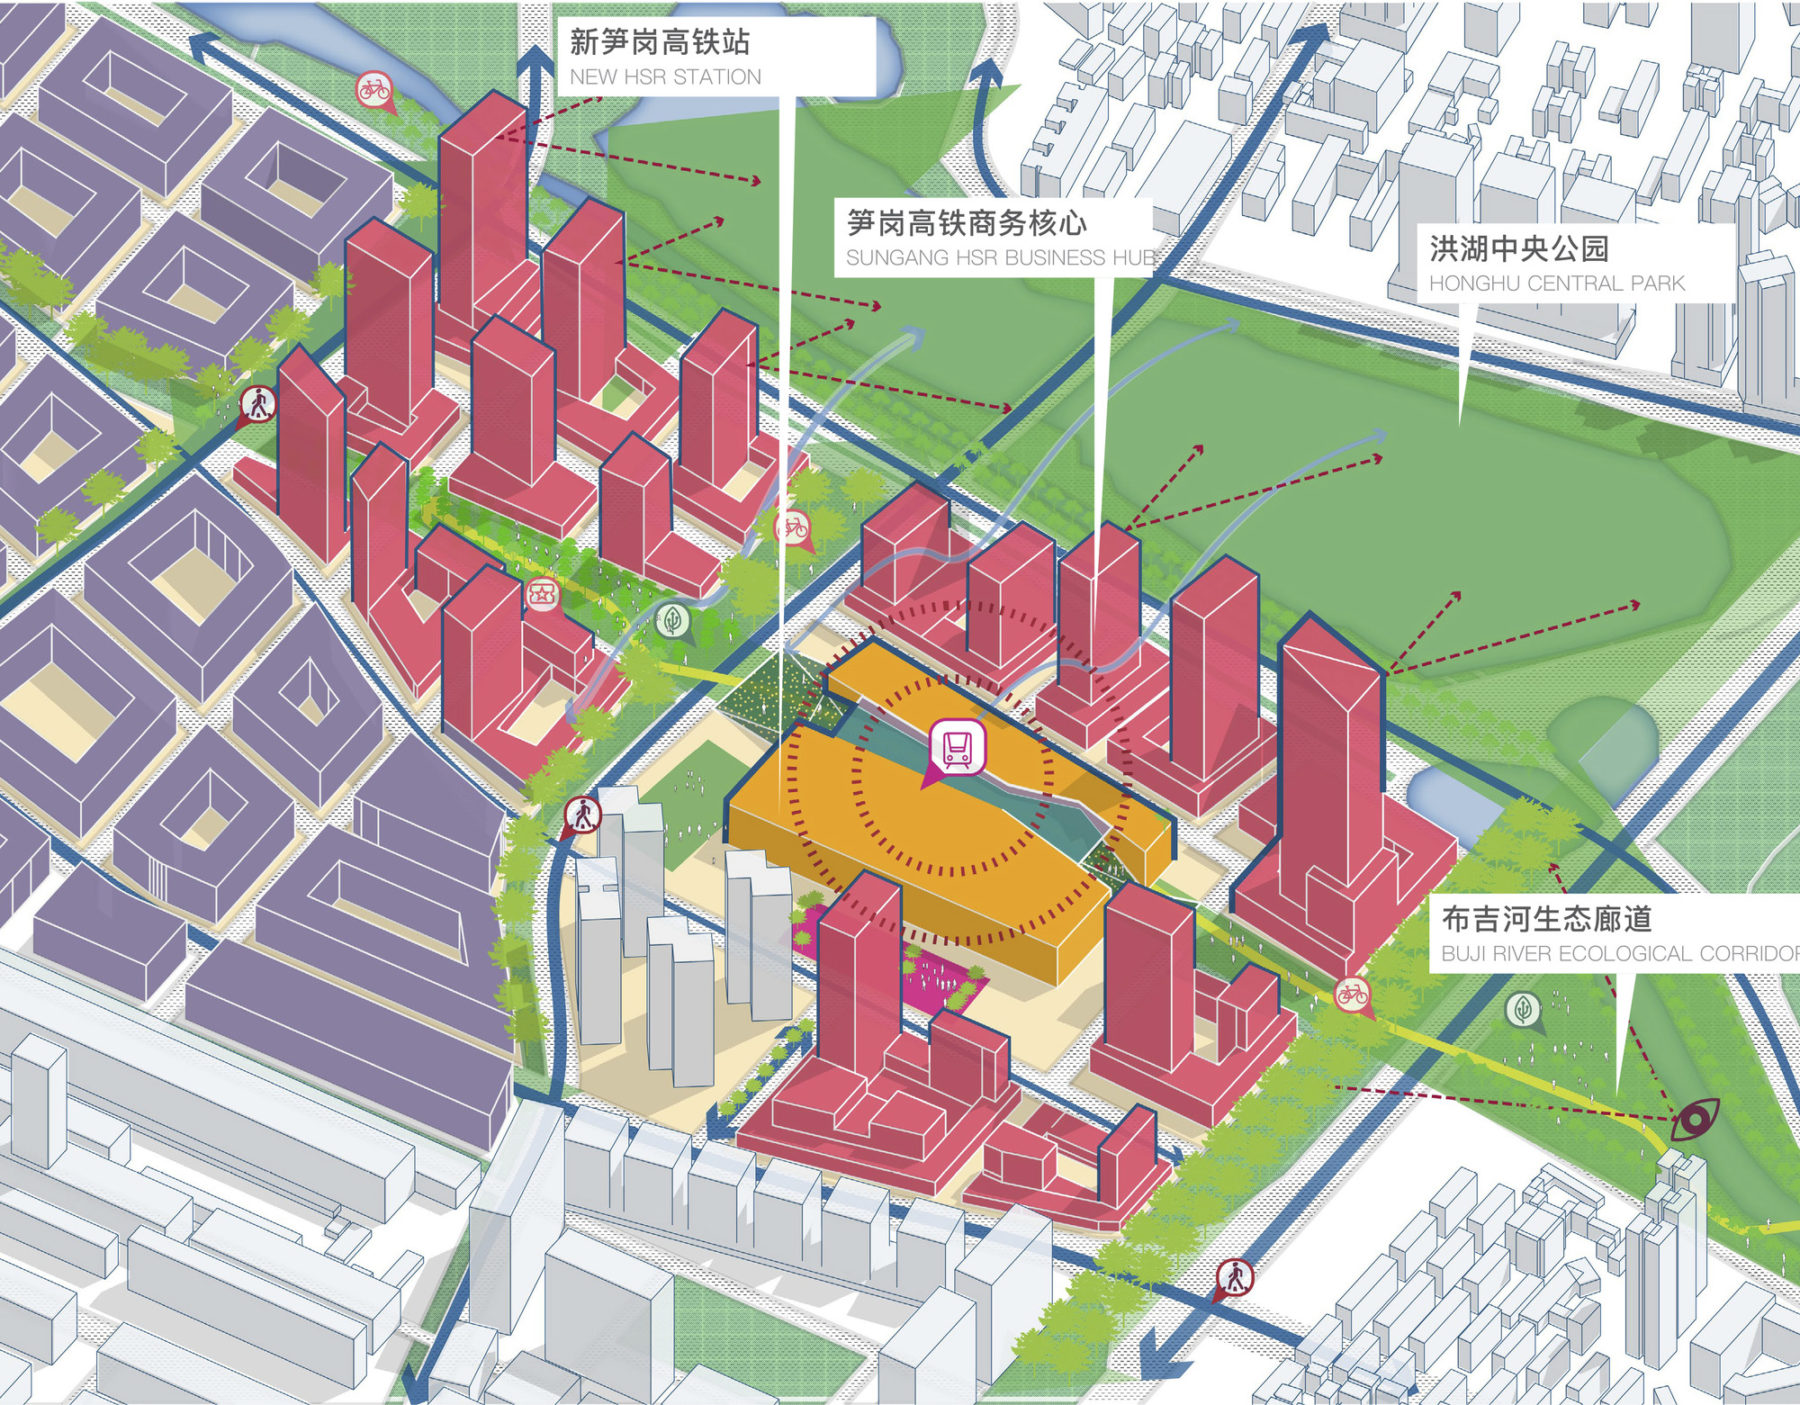 Map of Luohu with highlighted points of interest (e.g., transportation, pedestrian walkways, parks, etc.)